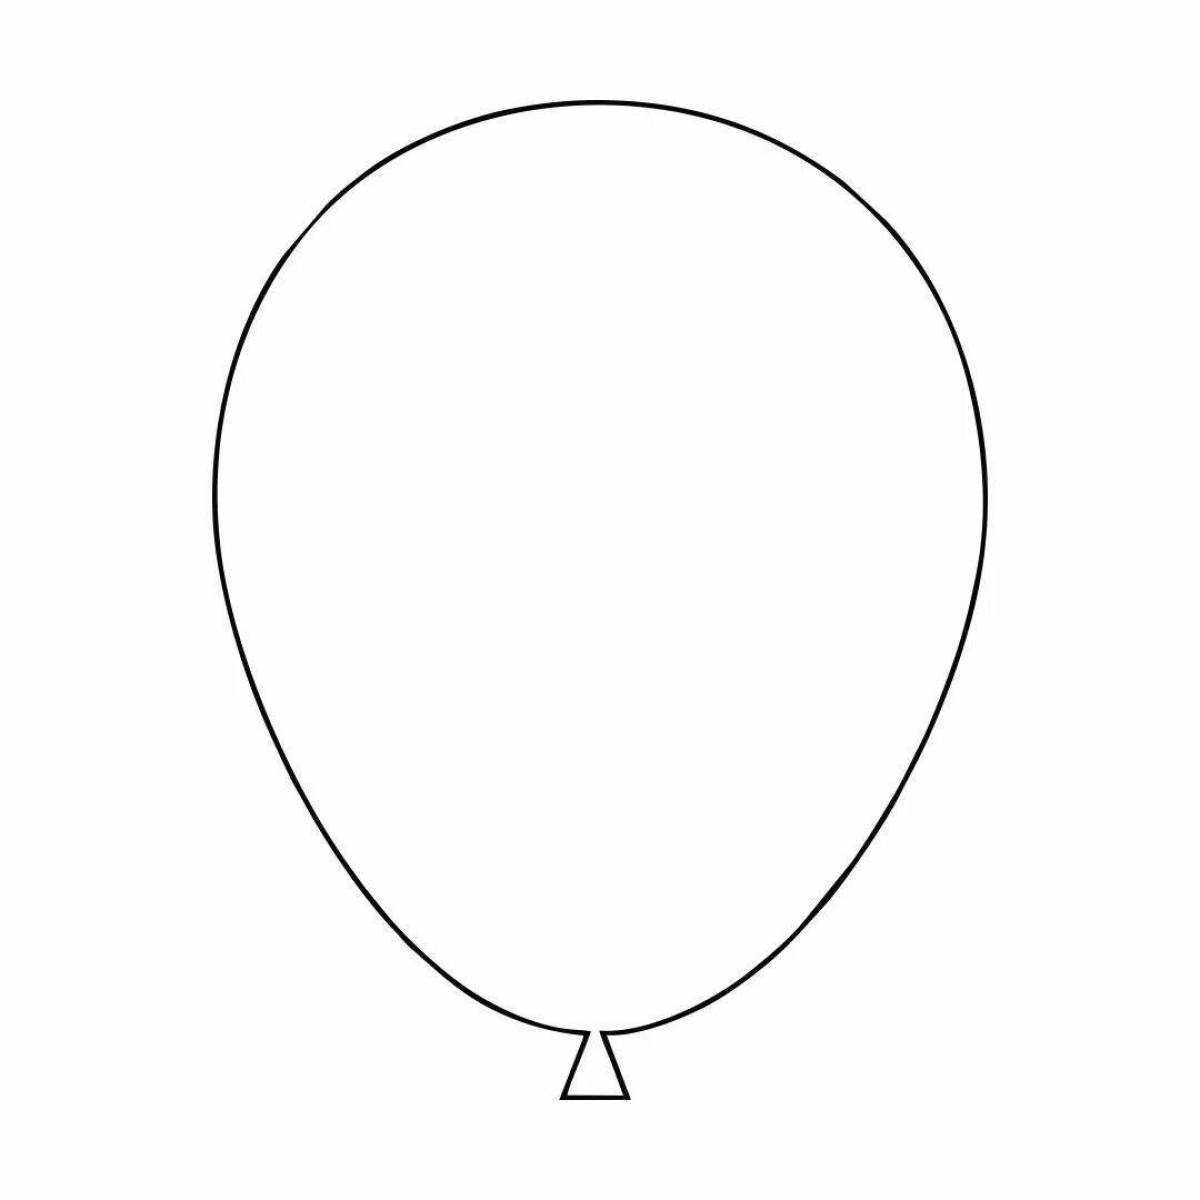 Color-frenzy balloons coloring page for children 3-4 years old